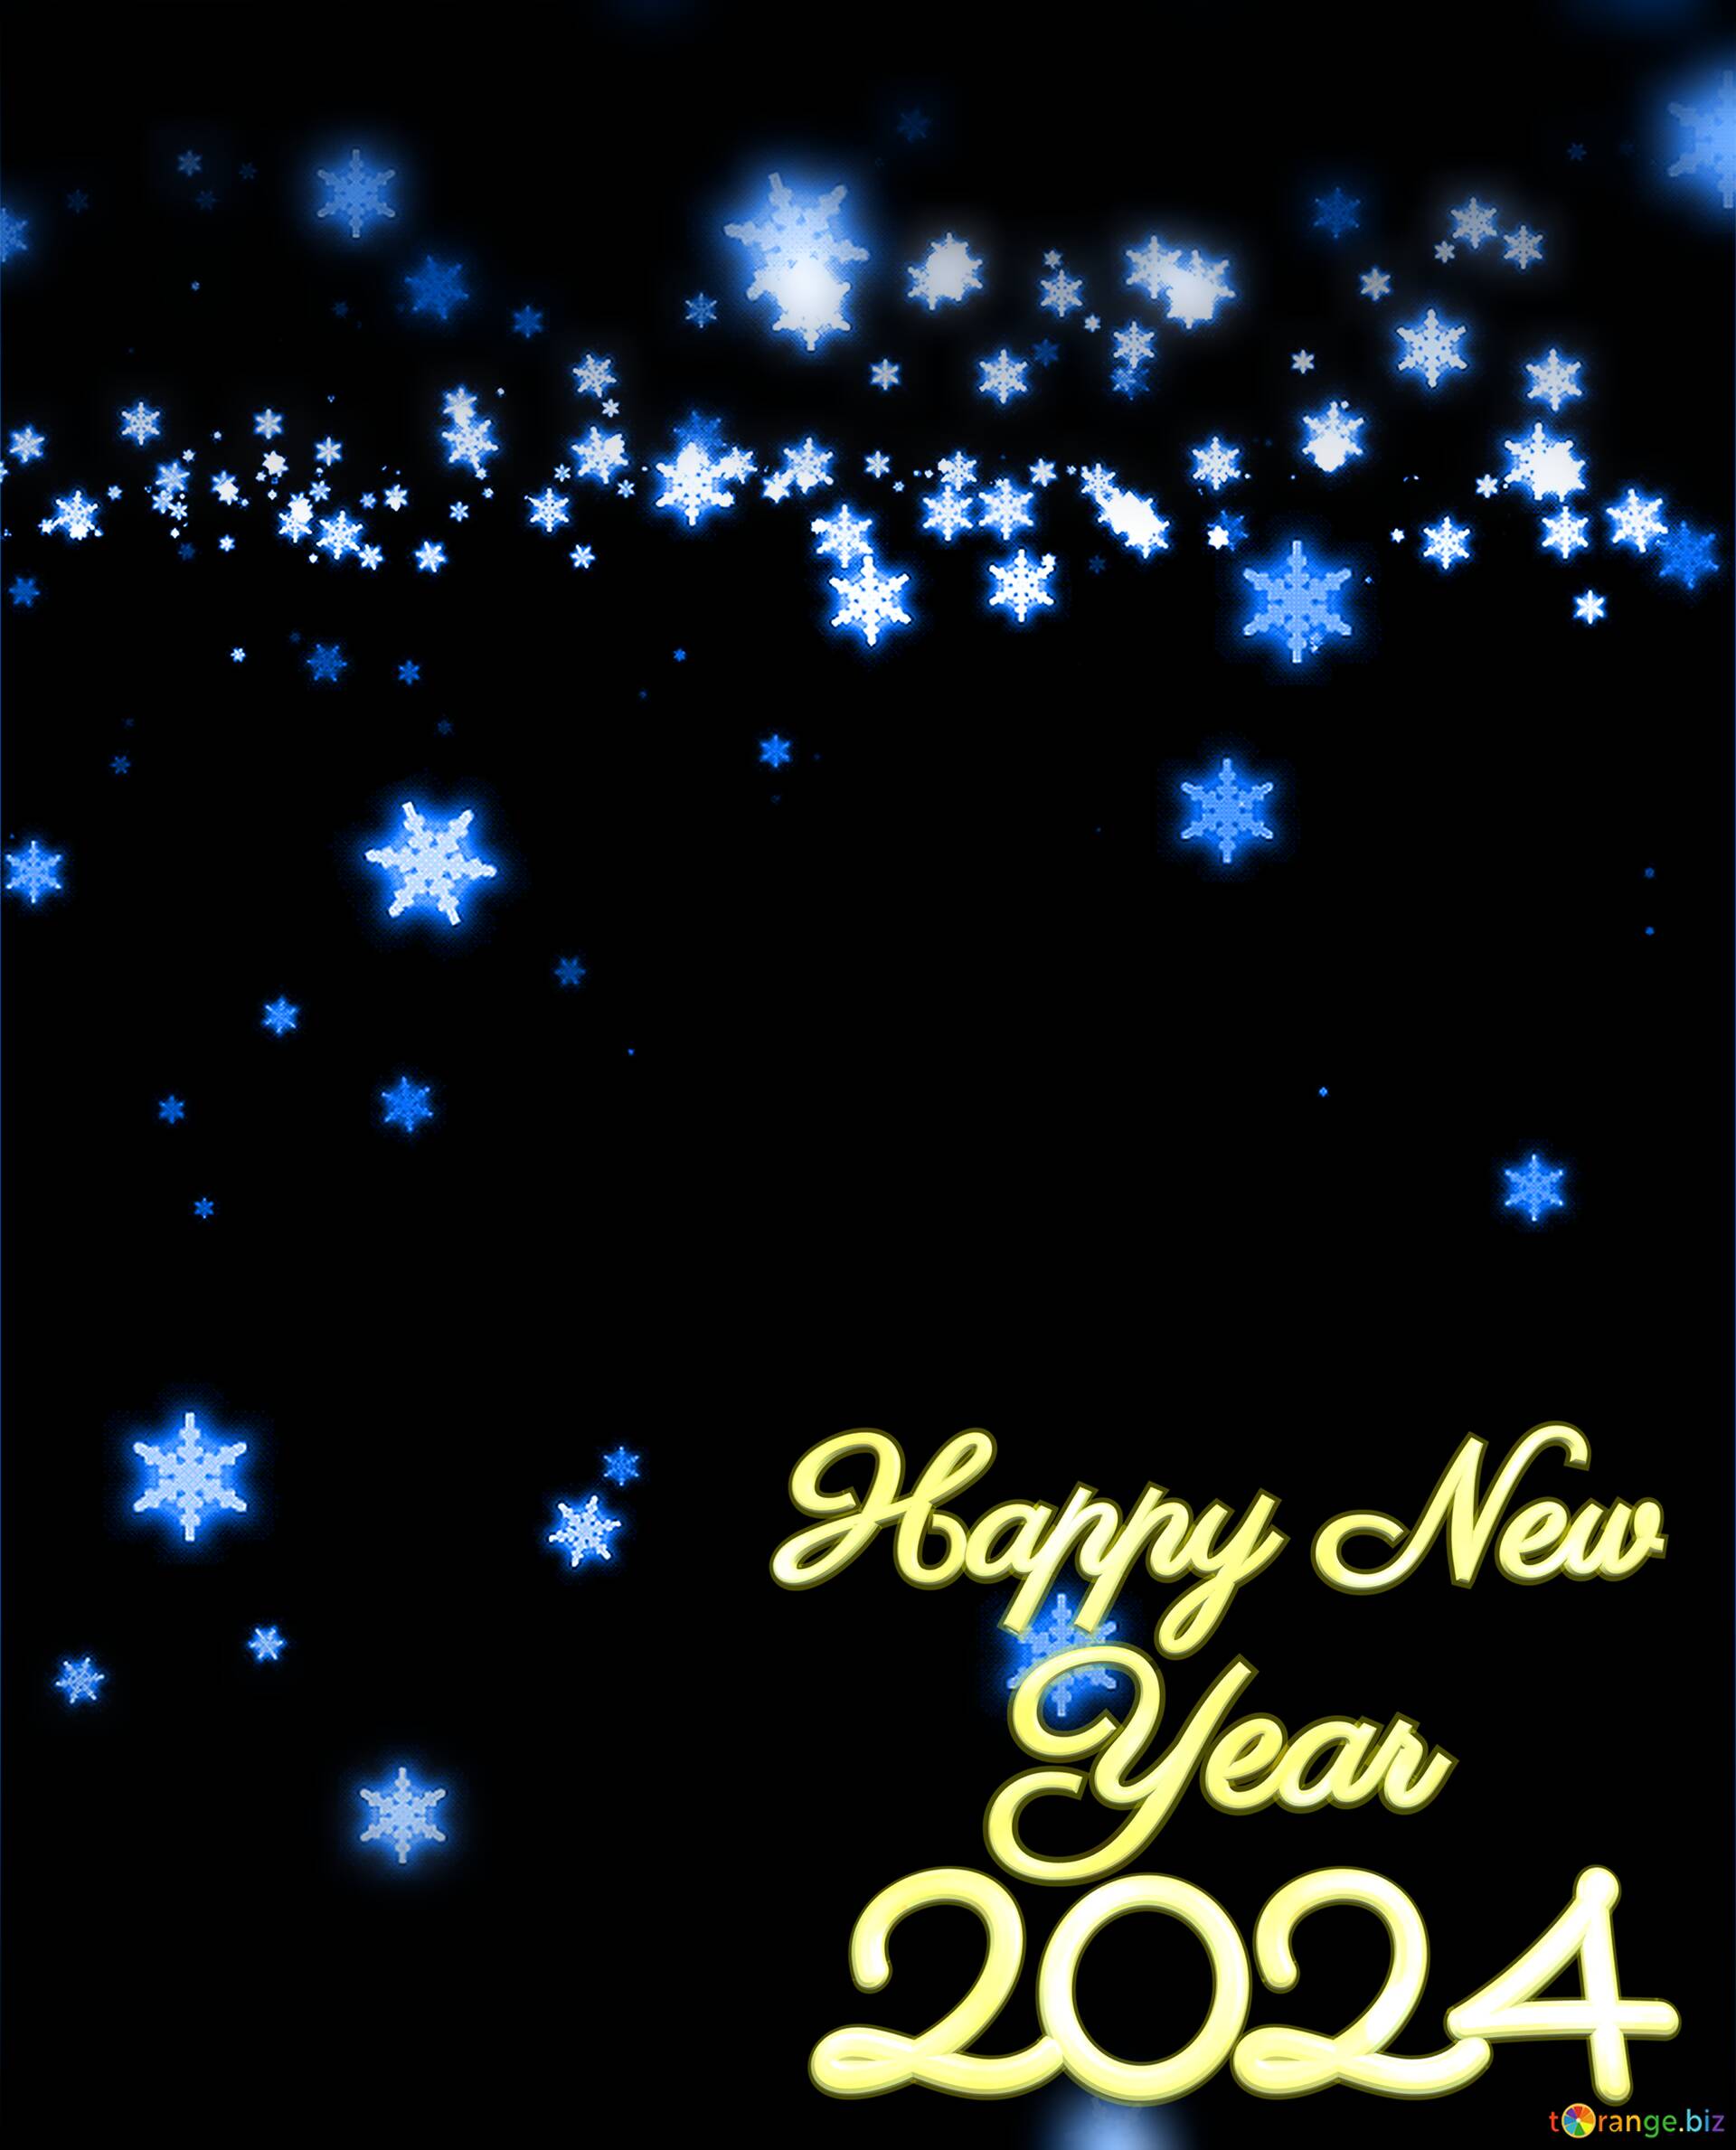 Download free picture Dark snowflakes background Happy new Year 2022 on  CC-BY License ~ Free Image Stock  ~ fx №138223